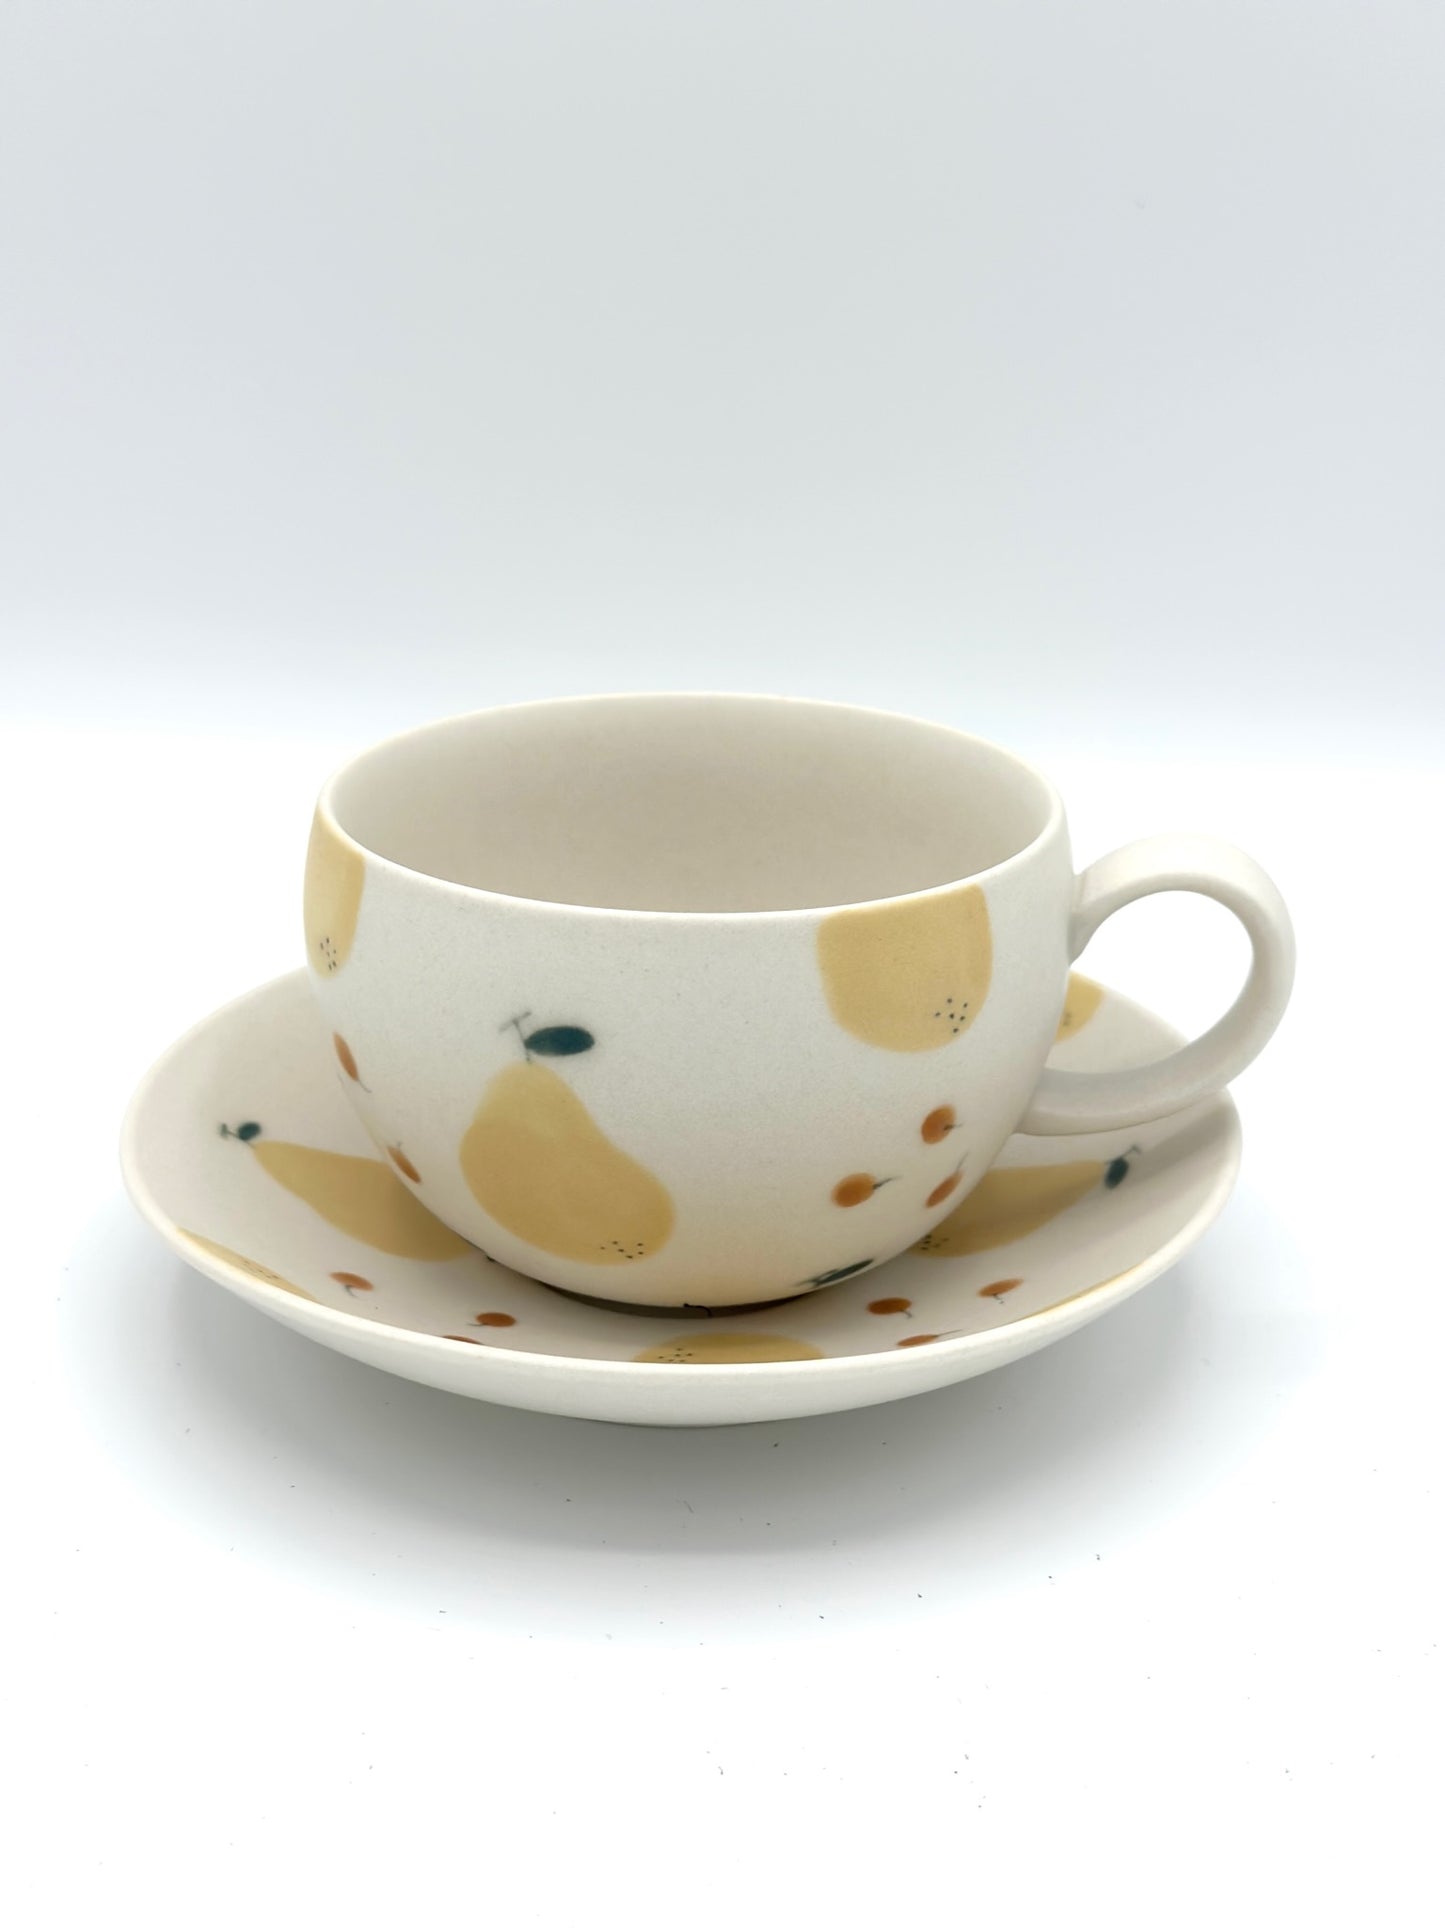 Handcrafted Latte cup and saucer